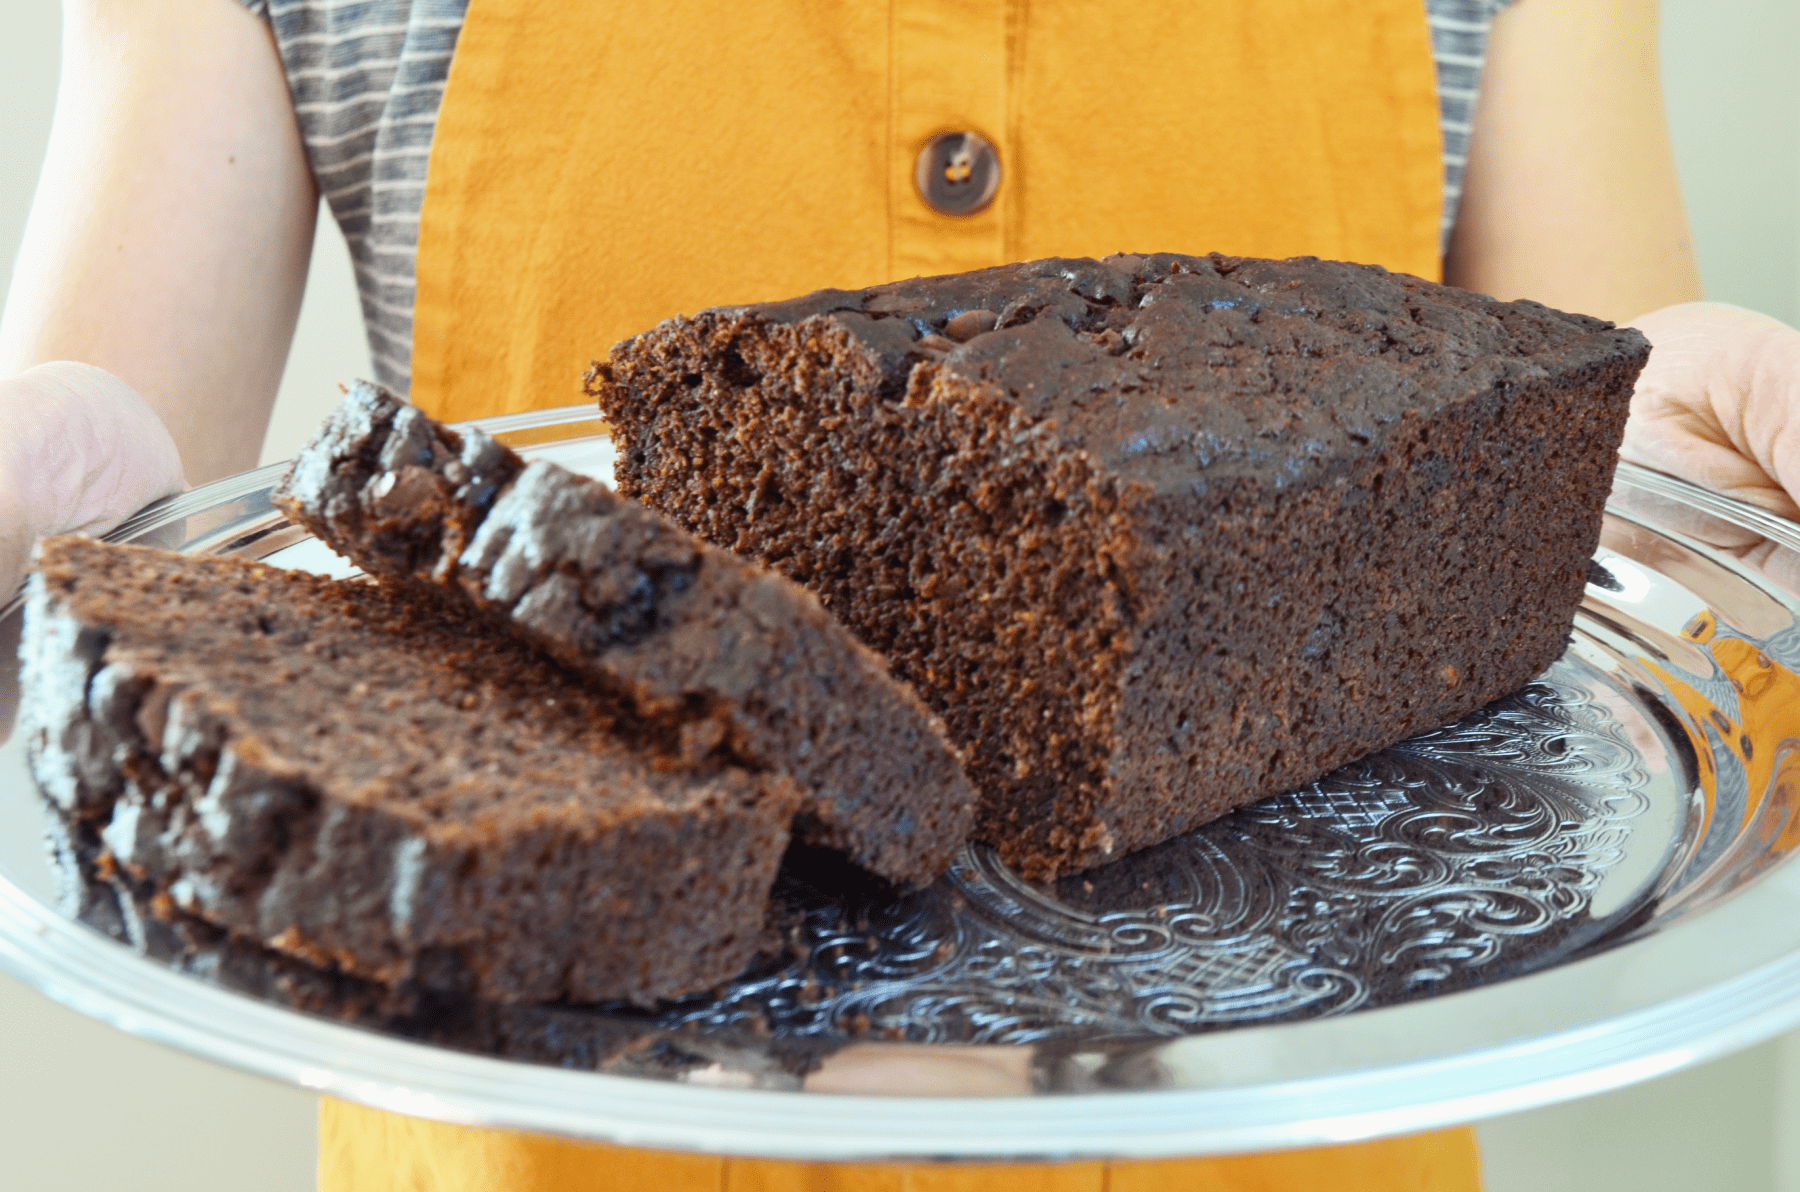 hands hold a silver platter carrying soft dark chocolate bread with bits of chocolate chunks sprinkled throughout.